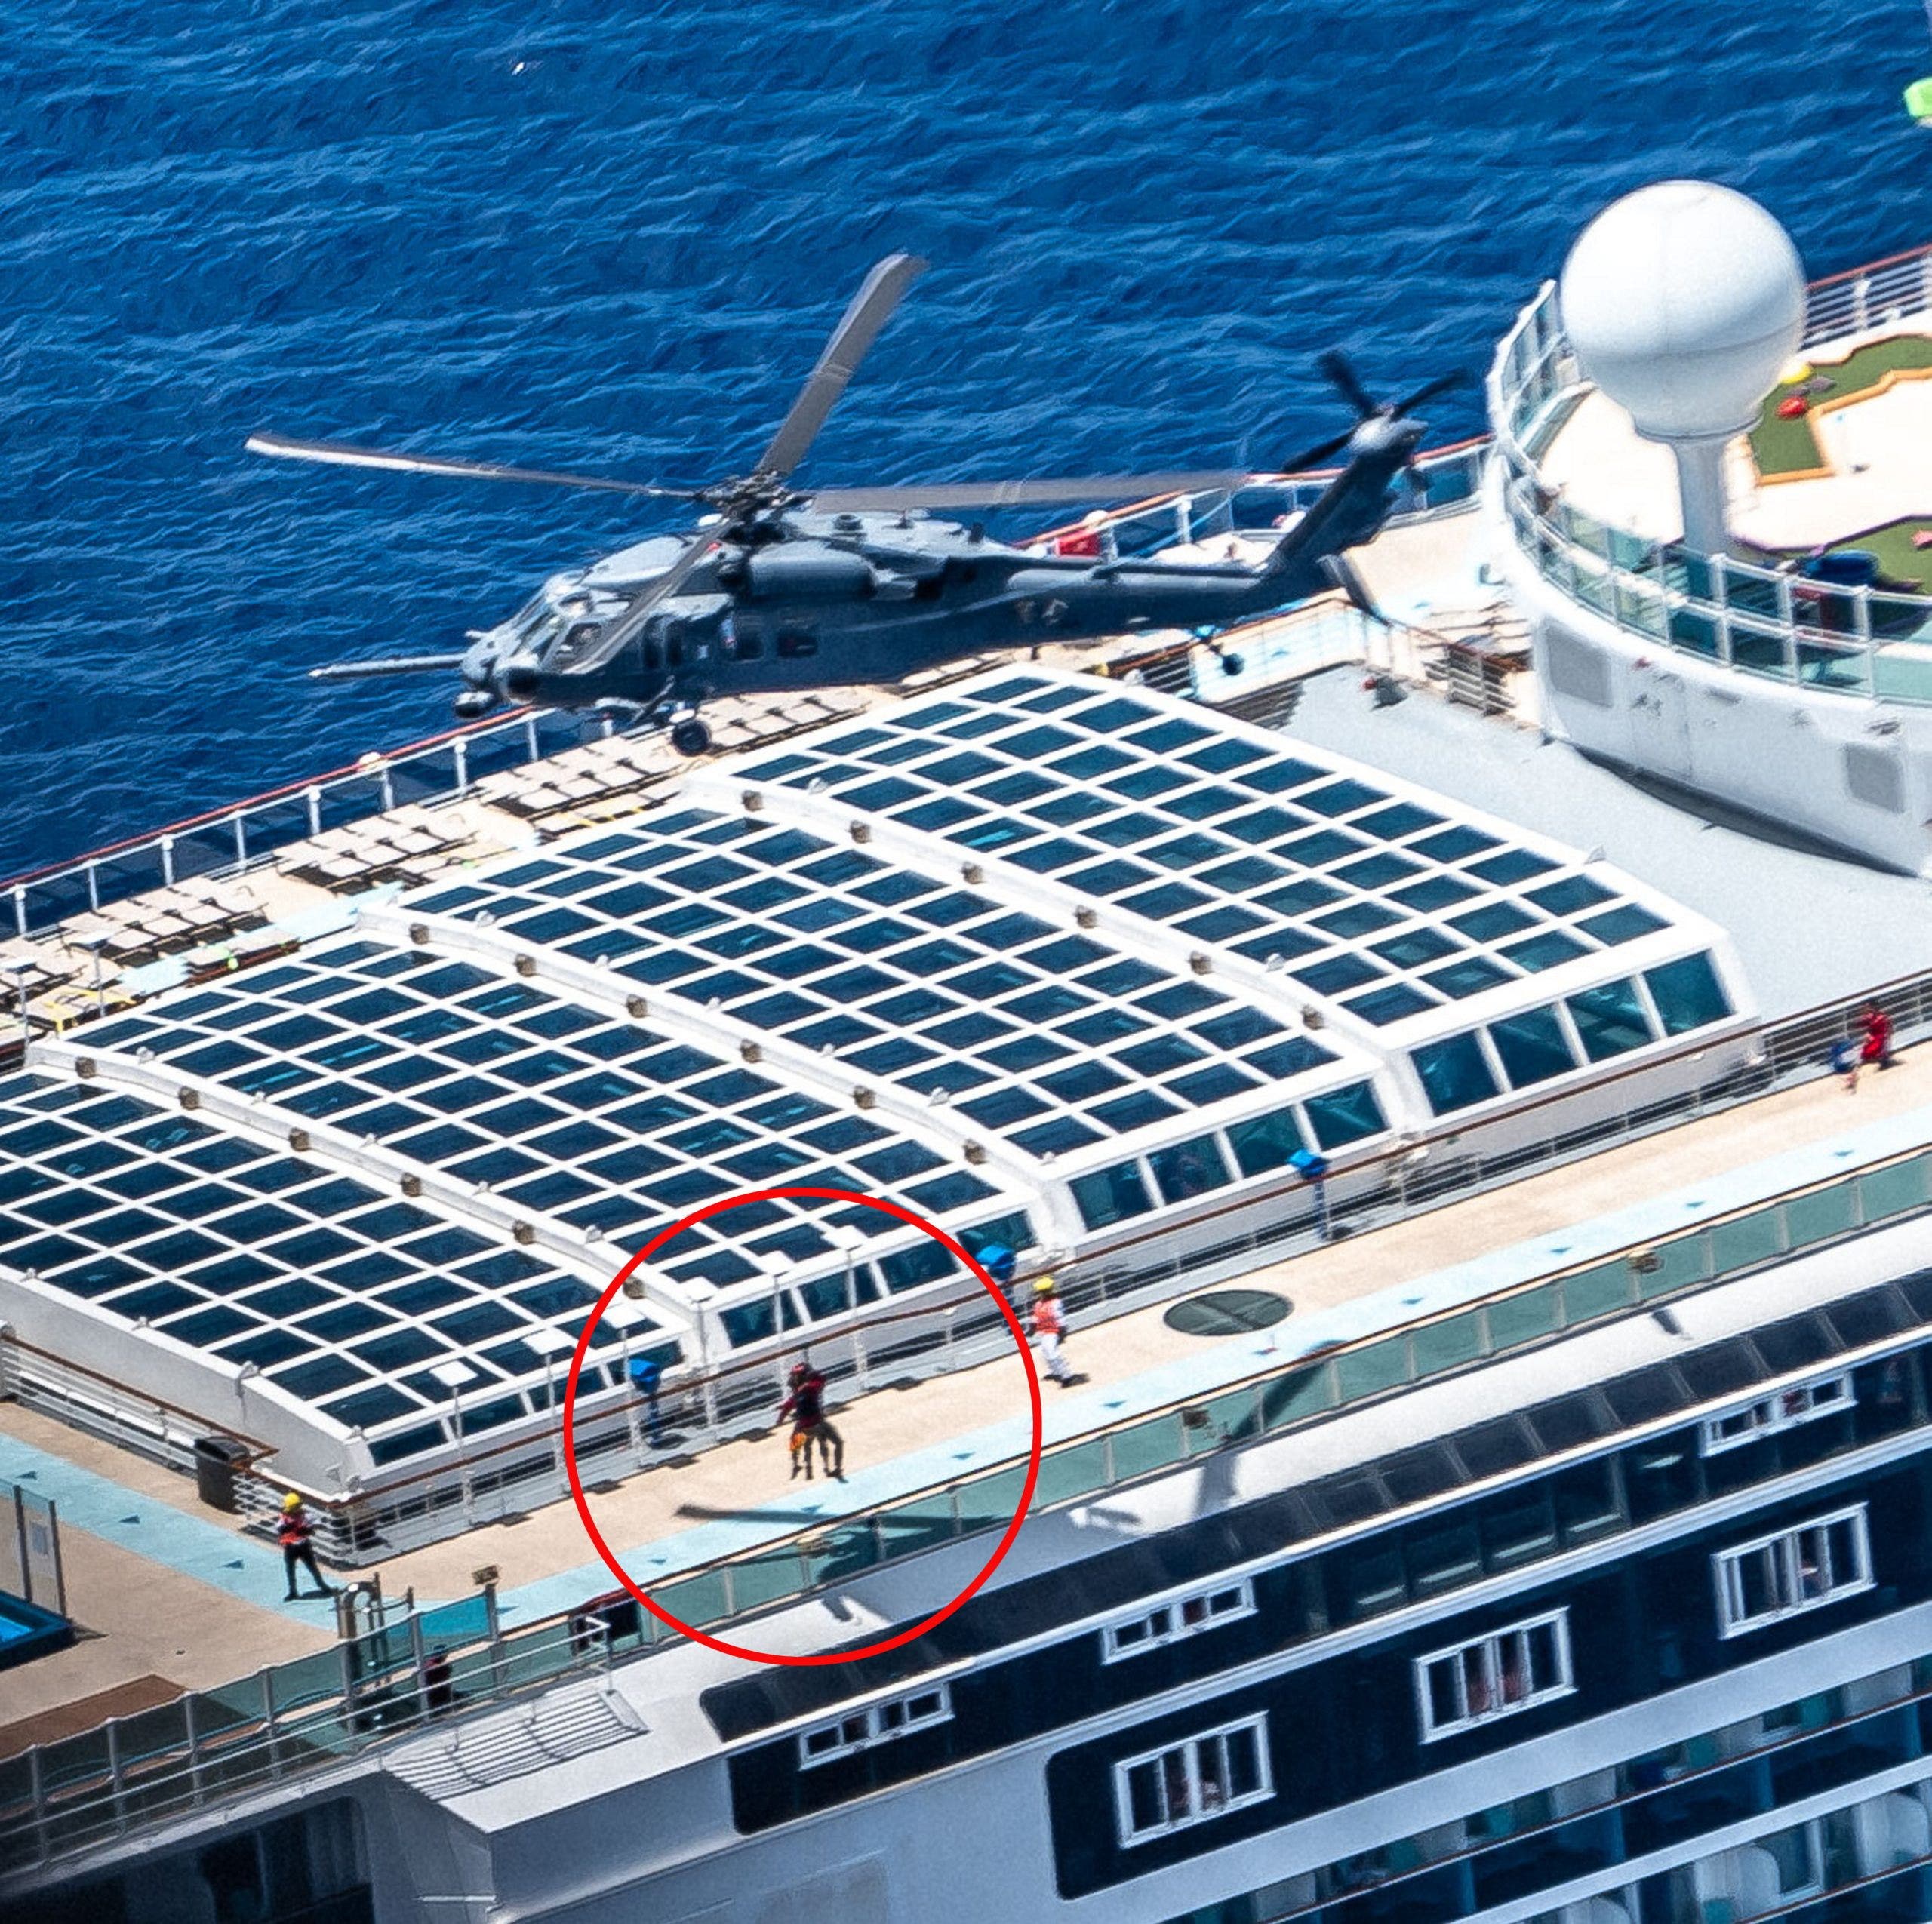 You are currently viewing Carnival Cruise Line rescue of mother and child in Air Force helicopter caught on camera